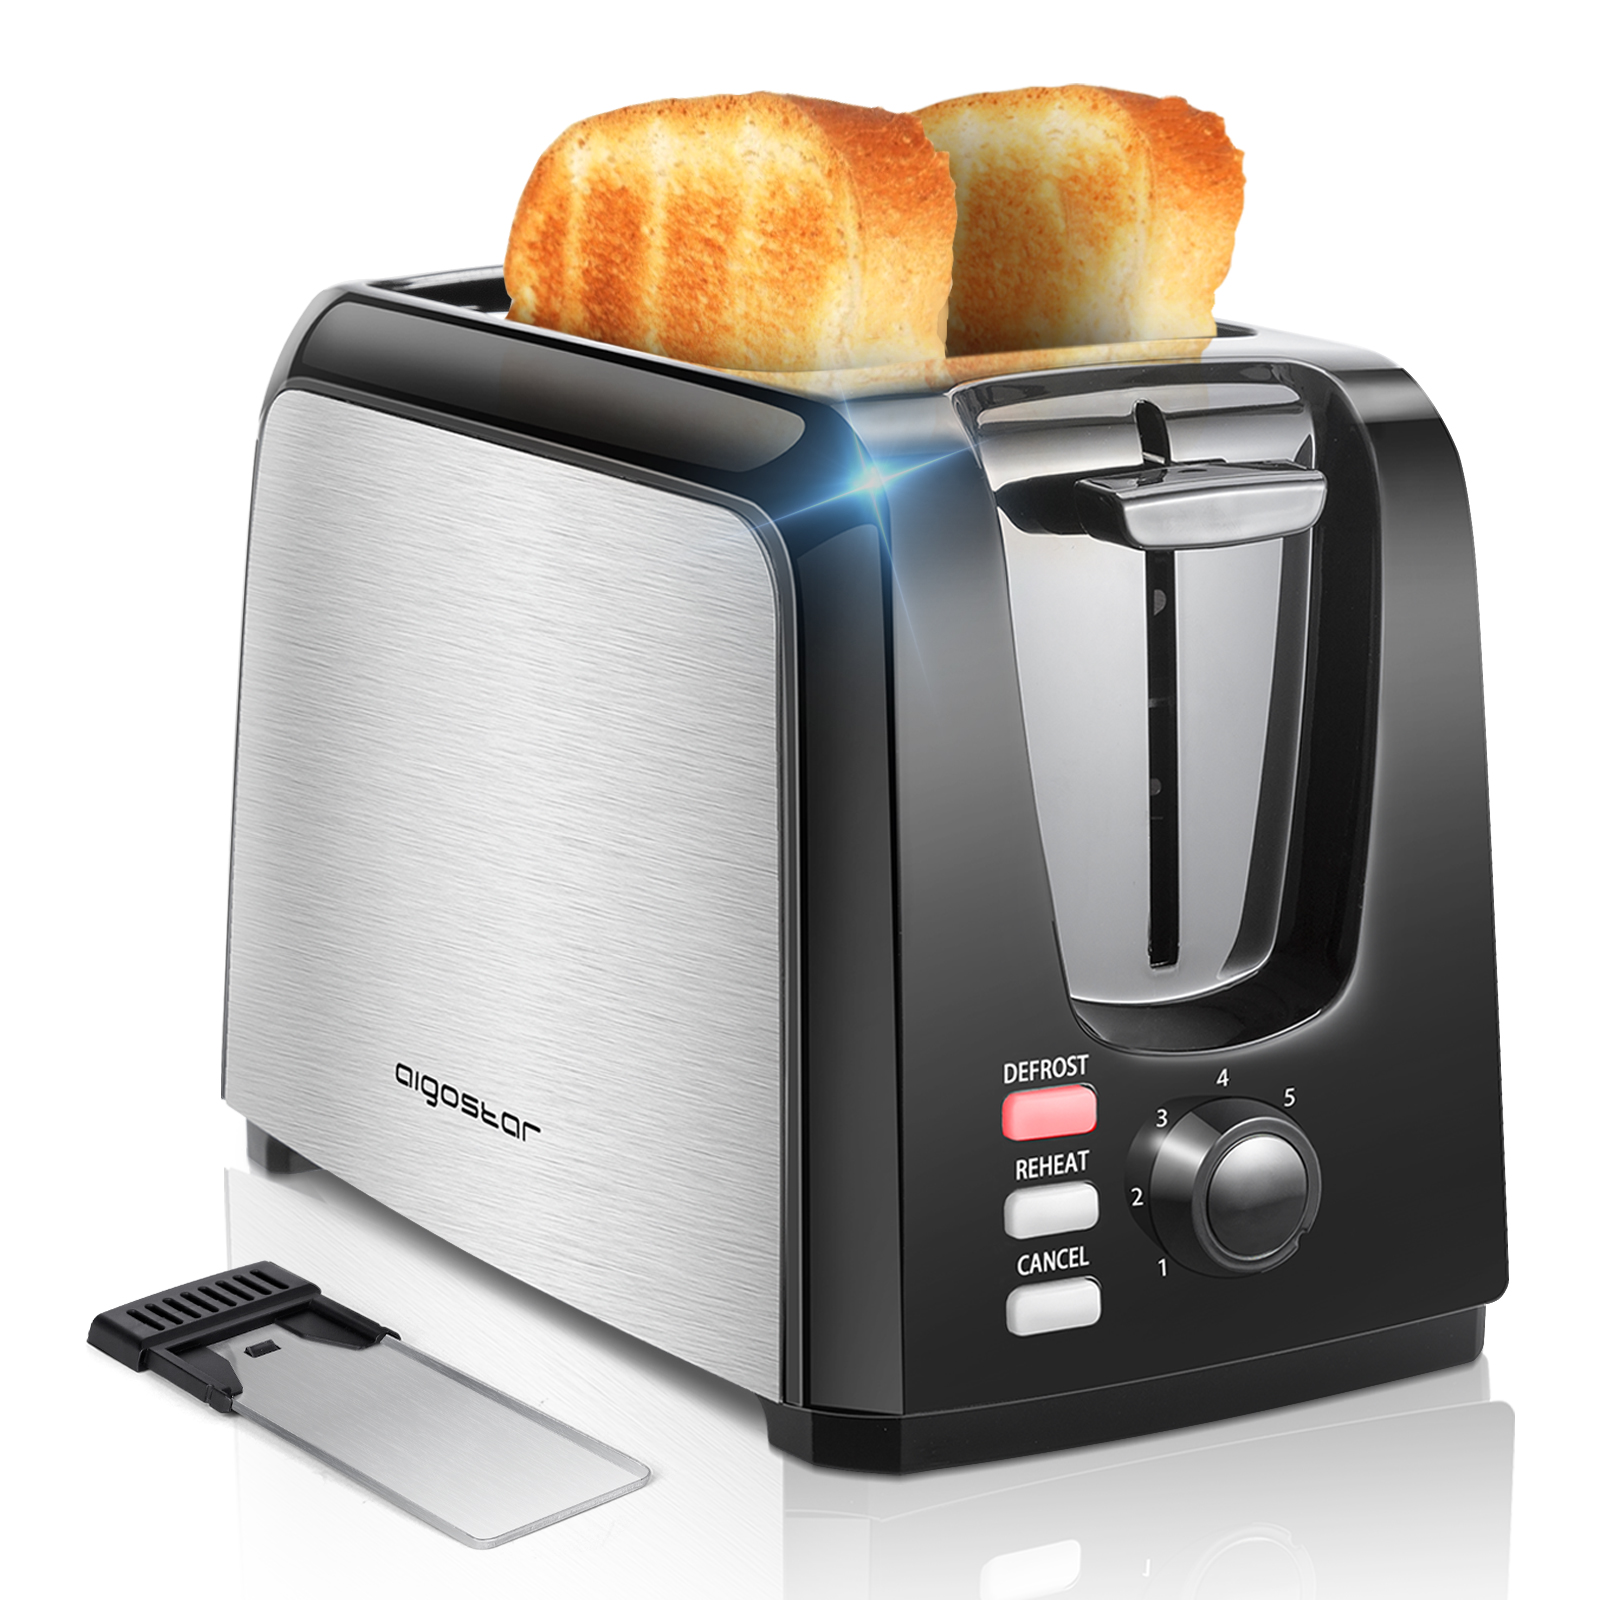 Toaster 2 Slice best rated prime Quickly Black Stainless Steel Bagel Toaster With 6 Shade Settings and Removable Crumb Tray for Bread Waffles 